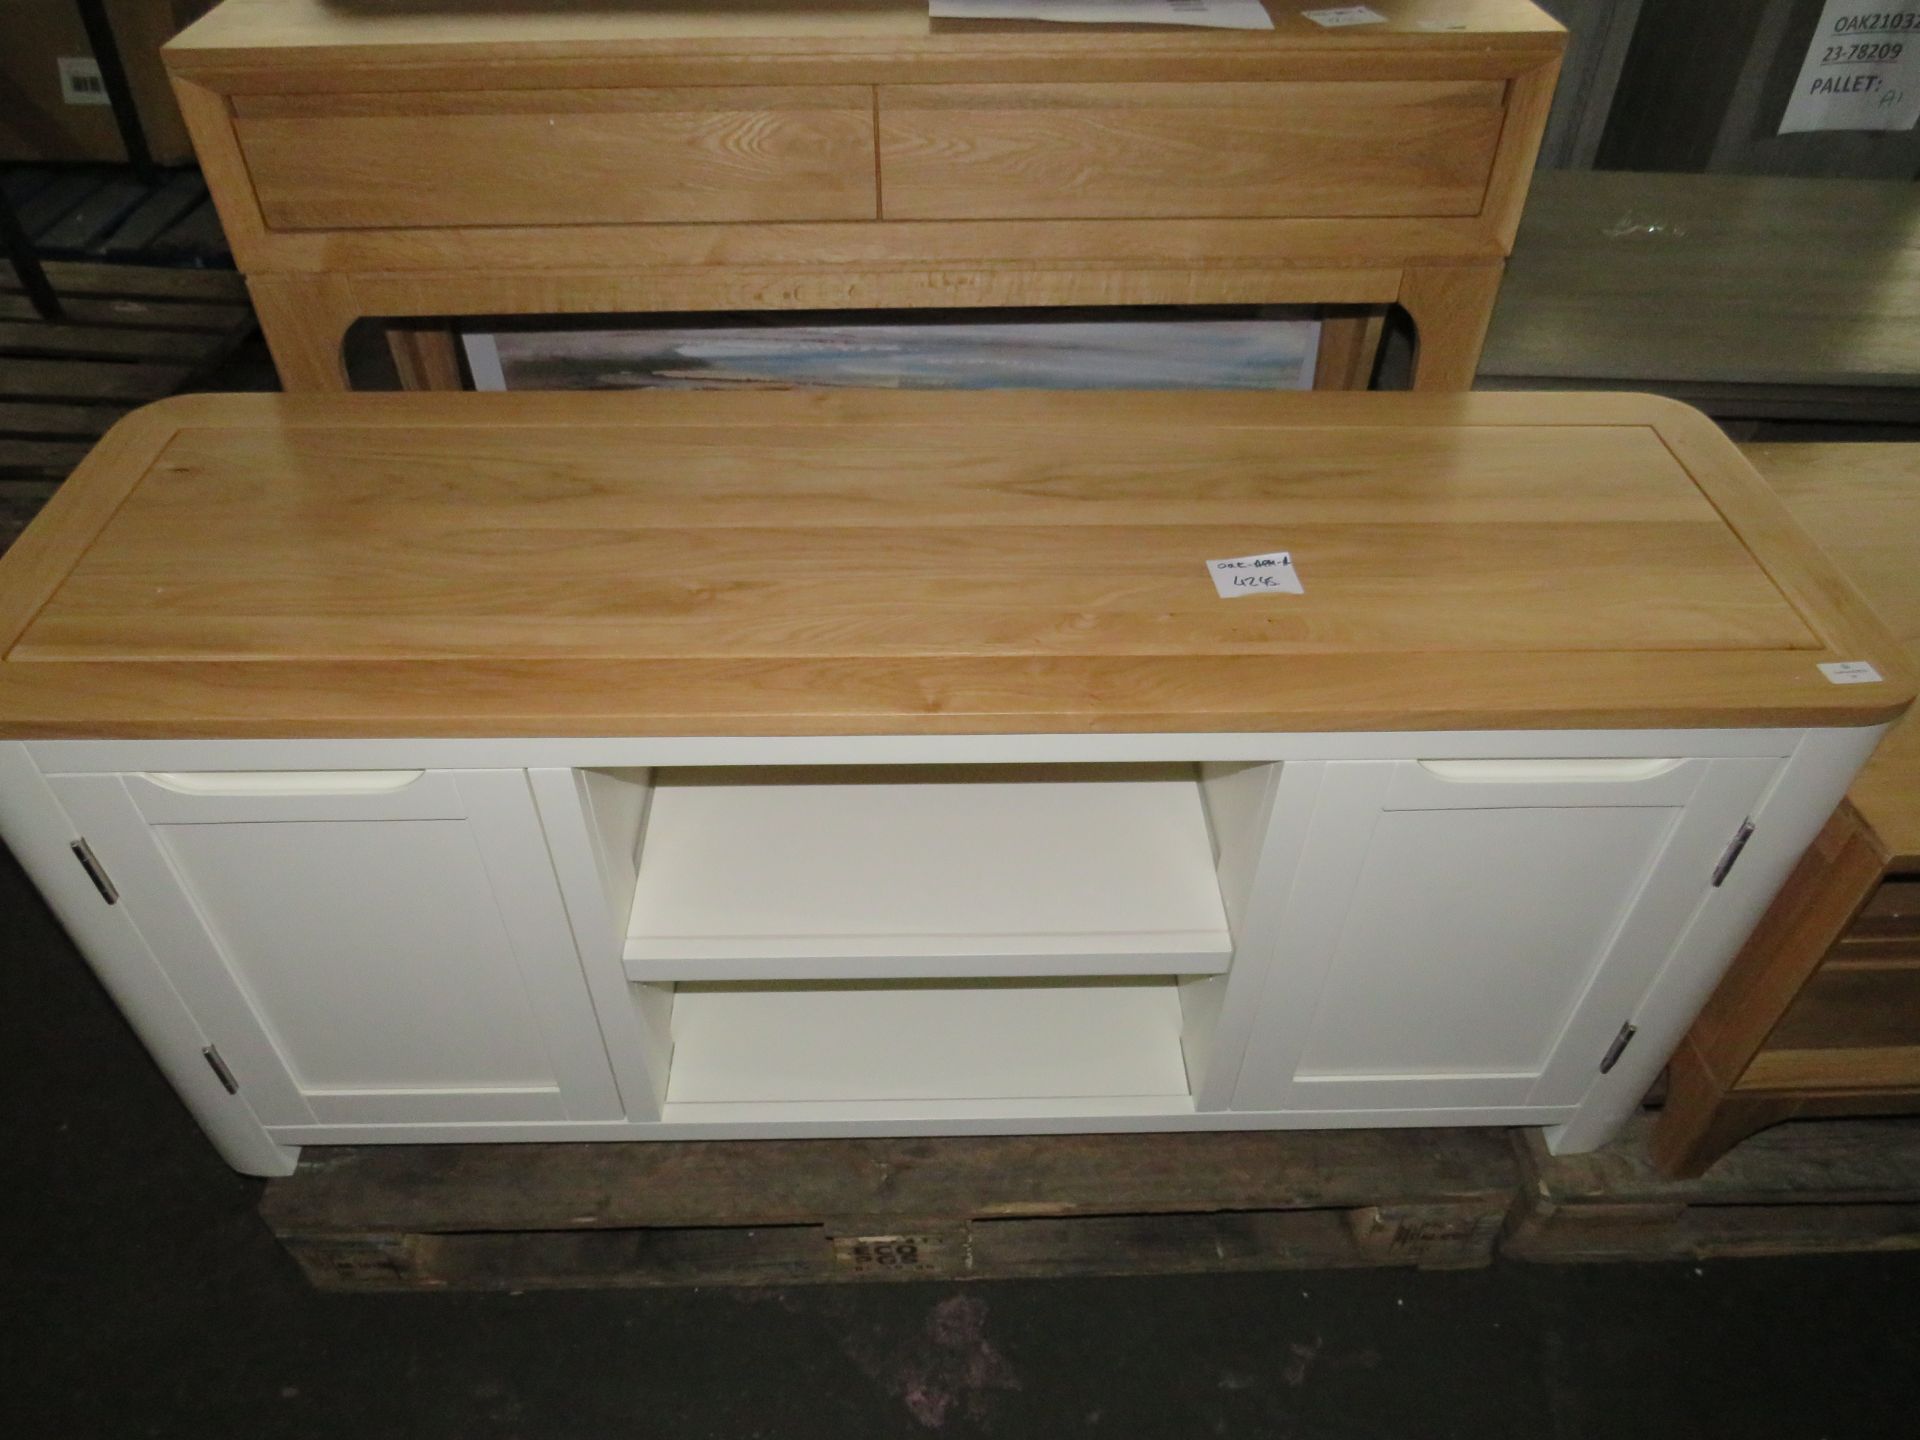 Oak Furnitureland Hove Natural Oak And Painted Large Tv Unit RRP 349.99 Our Hove range is made